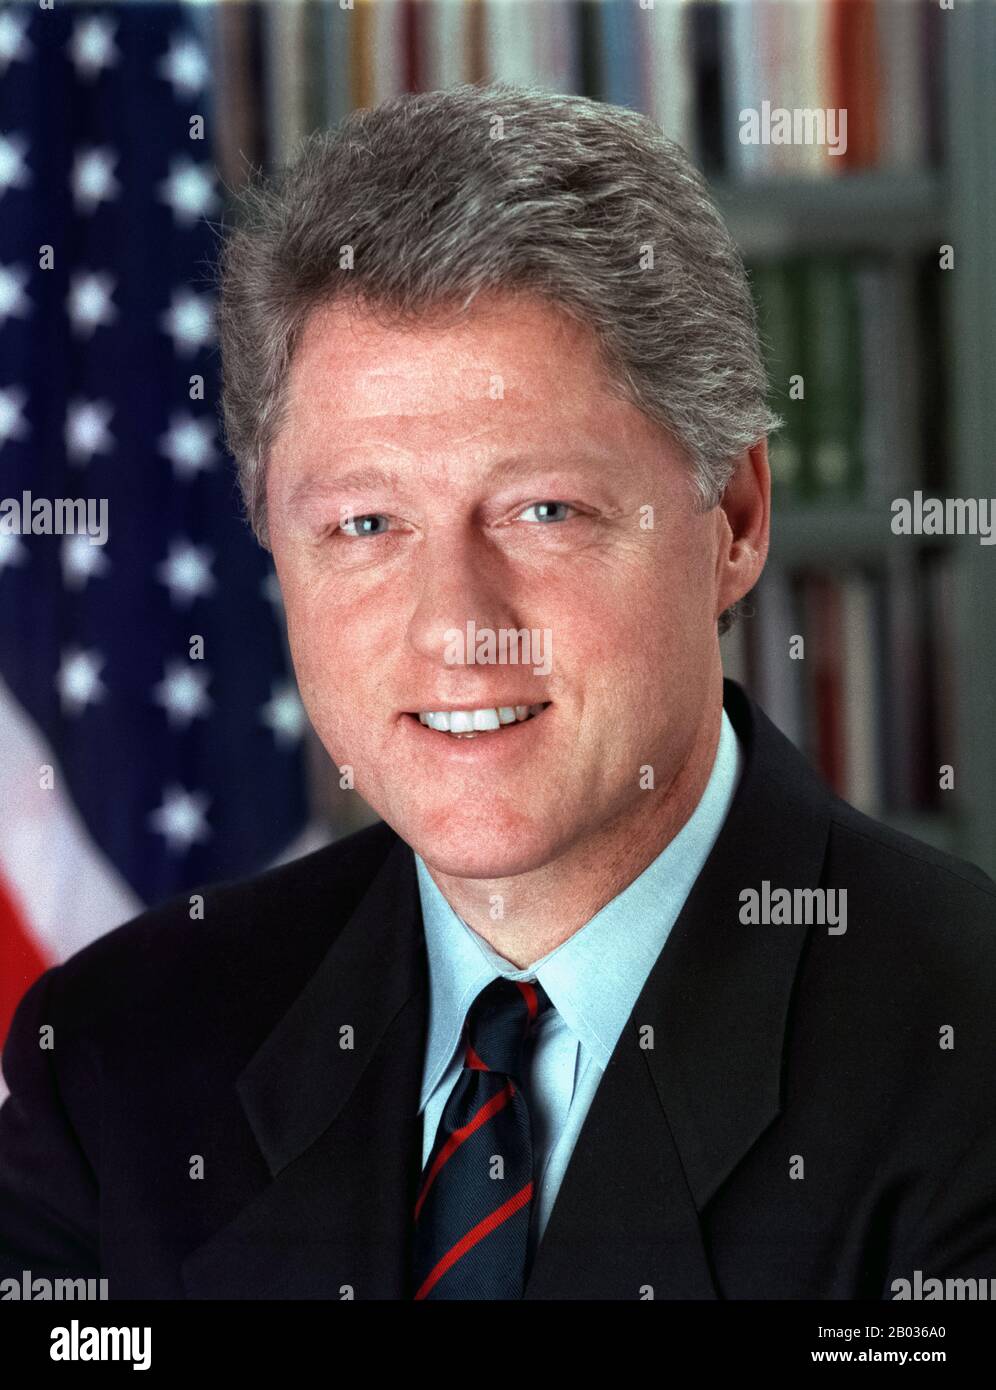 William Jefferson 'Bill' Clinton (born August 19, 1946) is an American politician who served as the 42nd President of the United States from 1993 to 2001. Clinton was Governor of Arkansas from 1979 to 1981 and 1983 to 1992, and Arkansas Attorney General from 1977 to 1979. Stock Photo